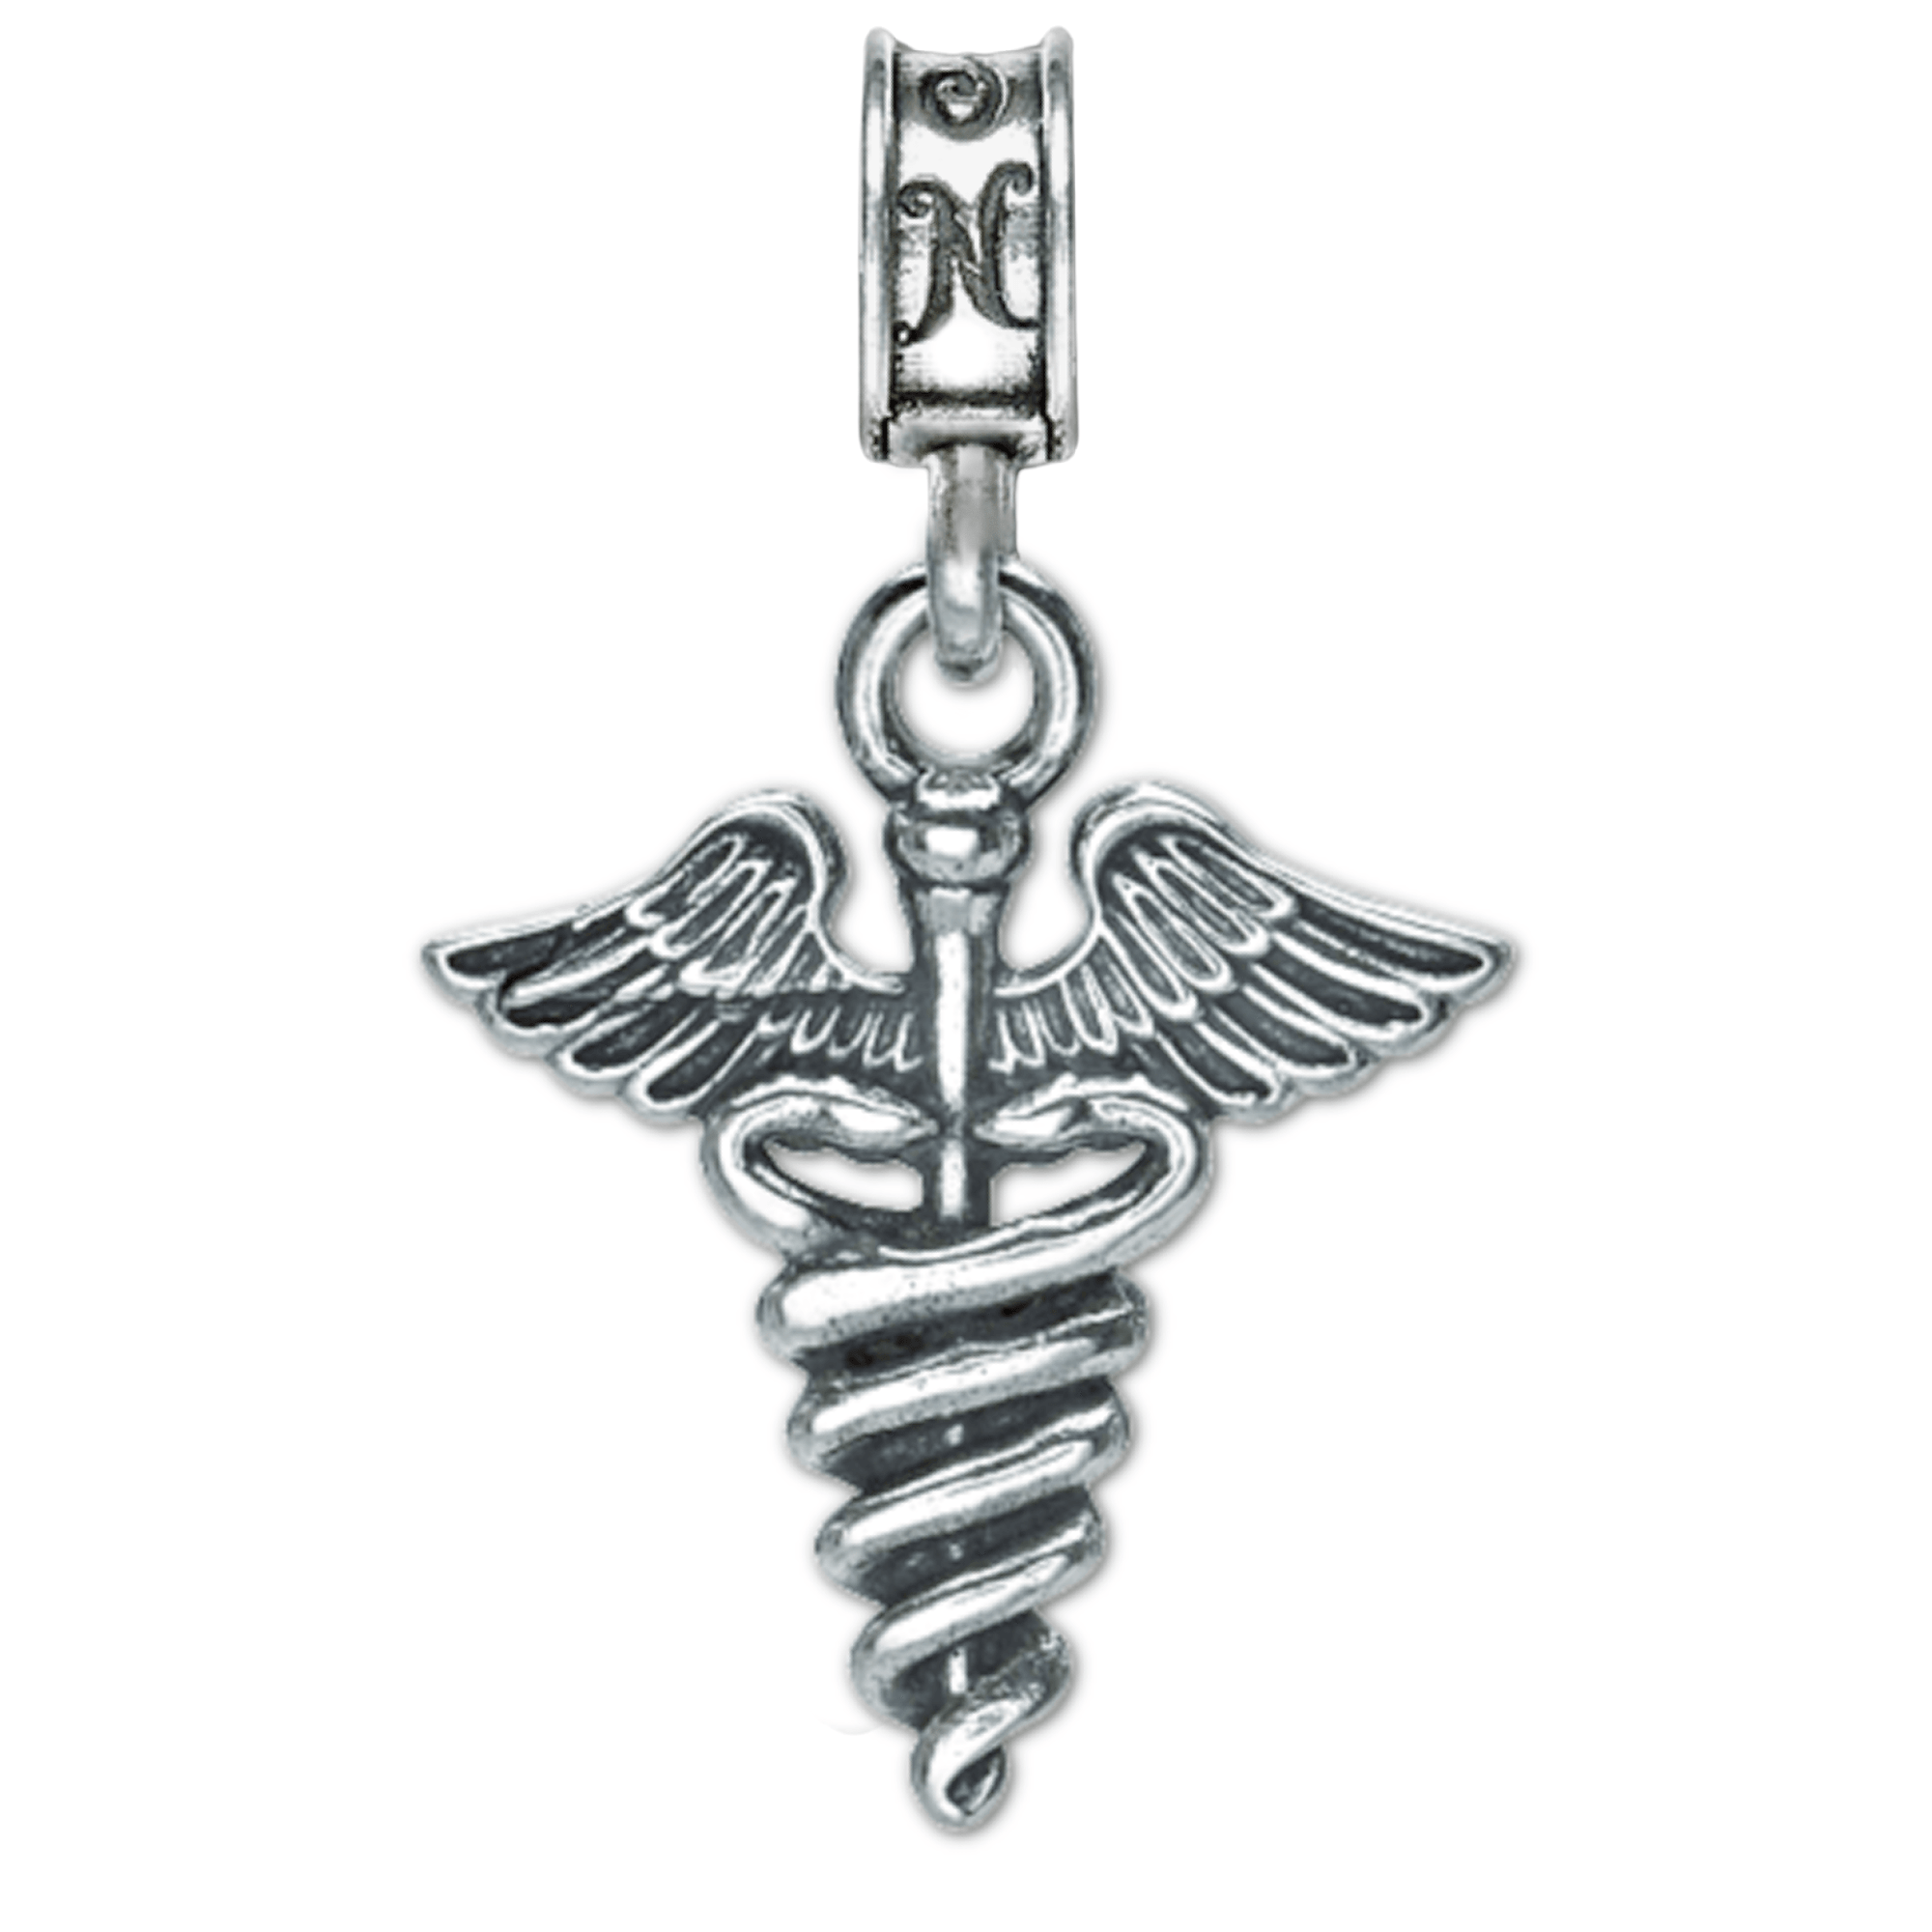 Military Jewelry, Military Charms, Military Gifts, Caduceus, Medical Charm